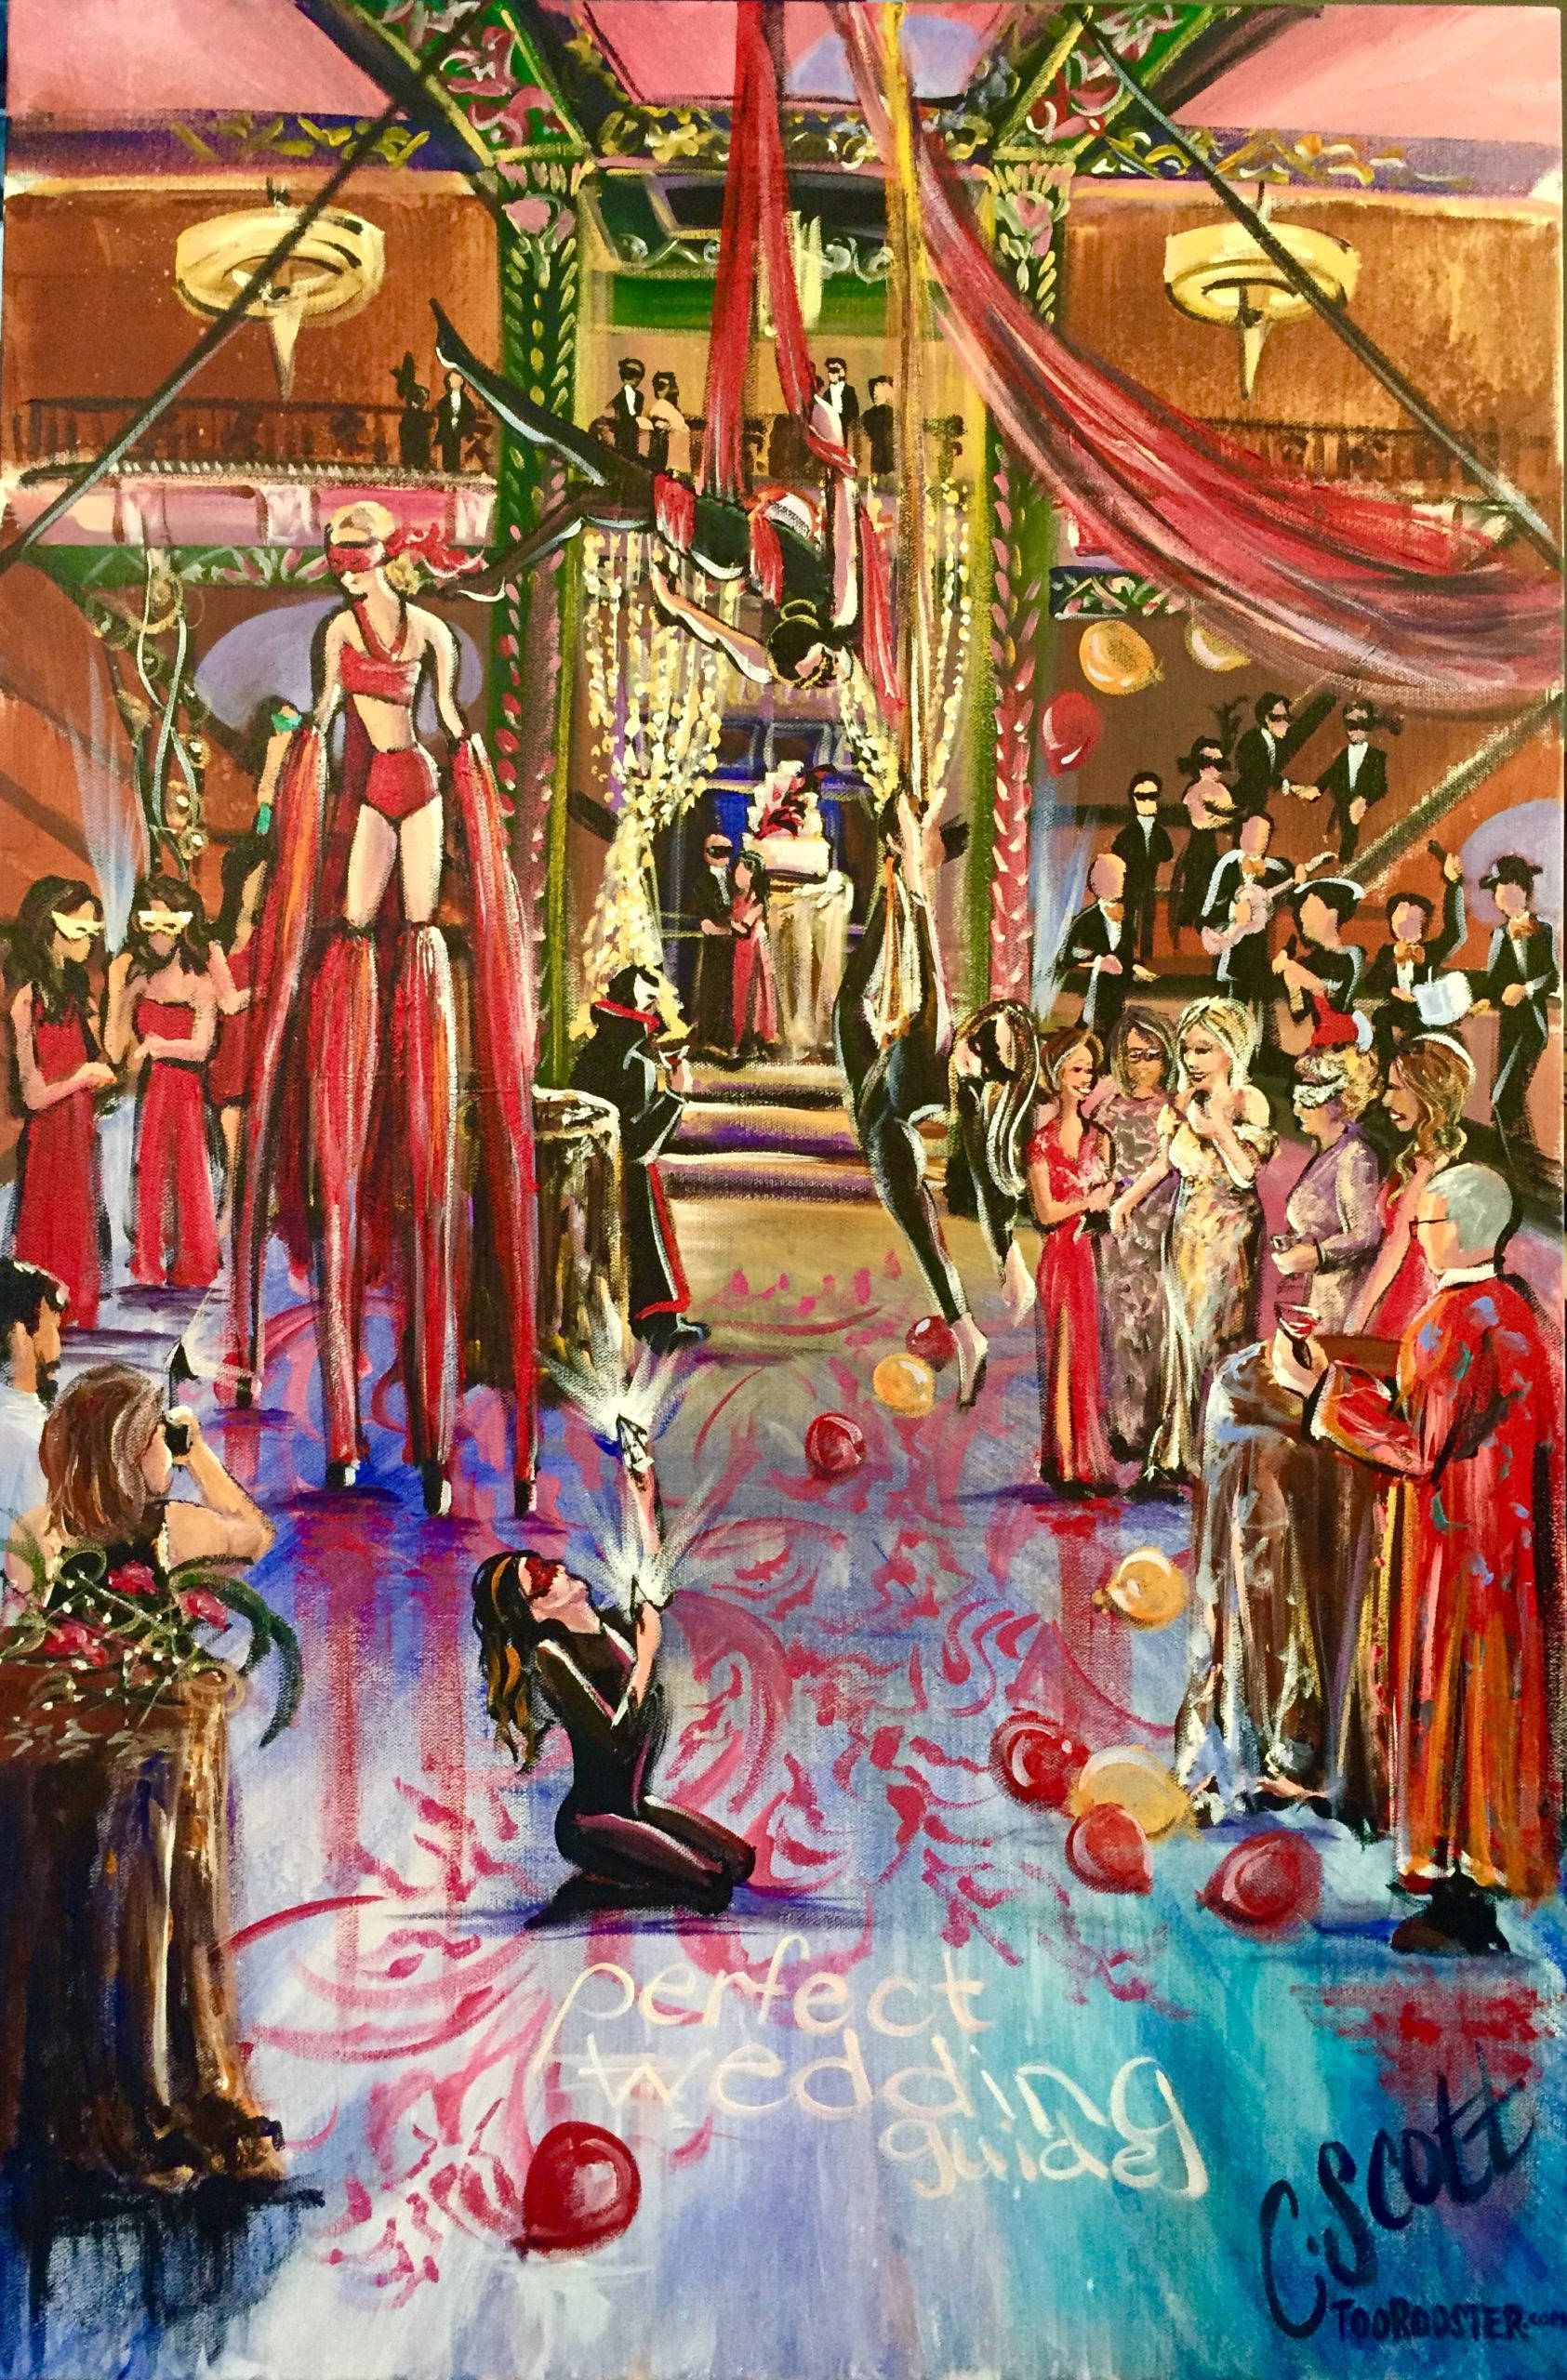 Live painting at the Kansas City Perfect Wedding Guide masquerade ball, The Grand Hall, 24x36 canvas